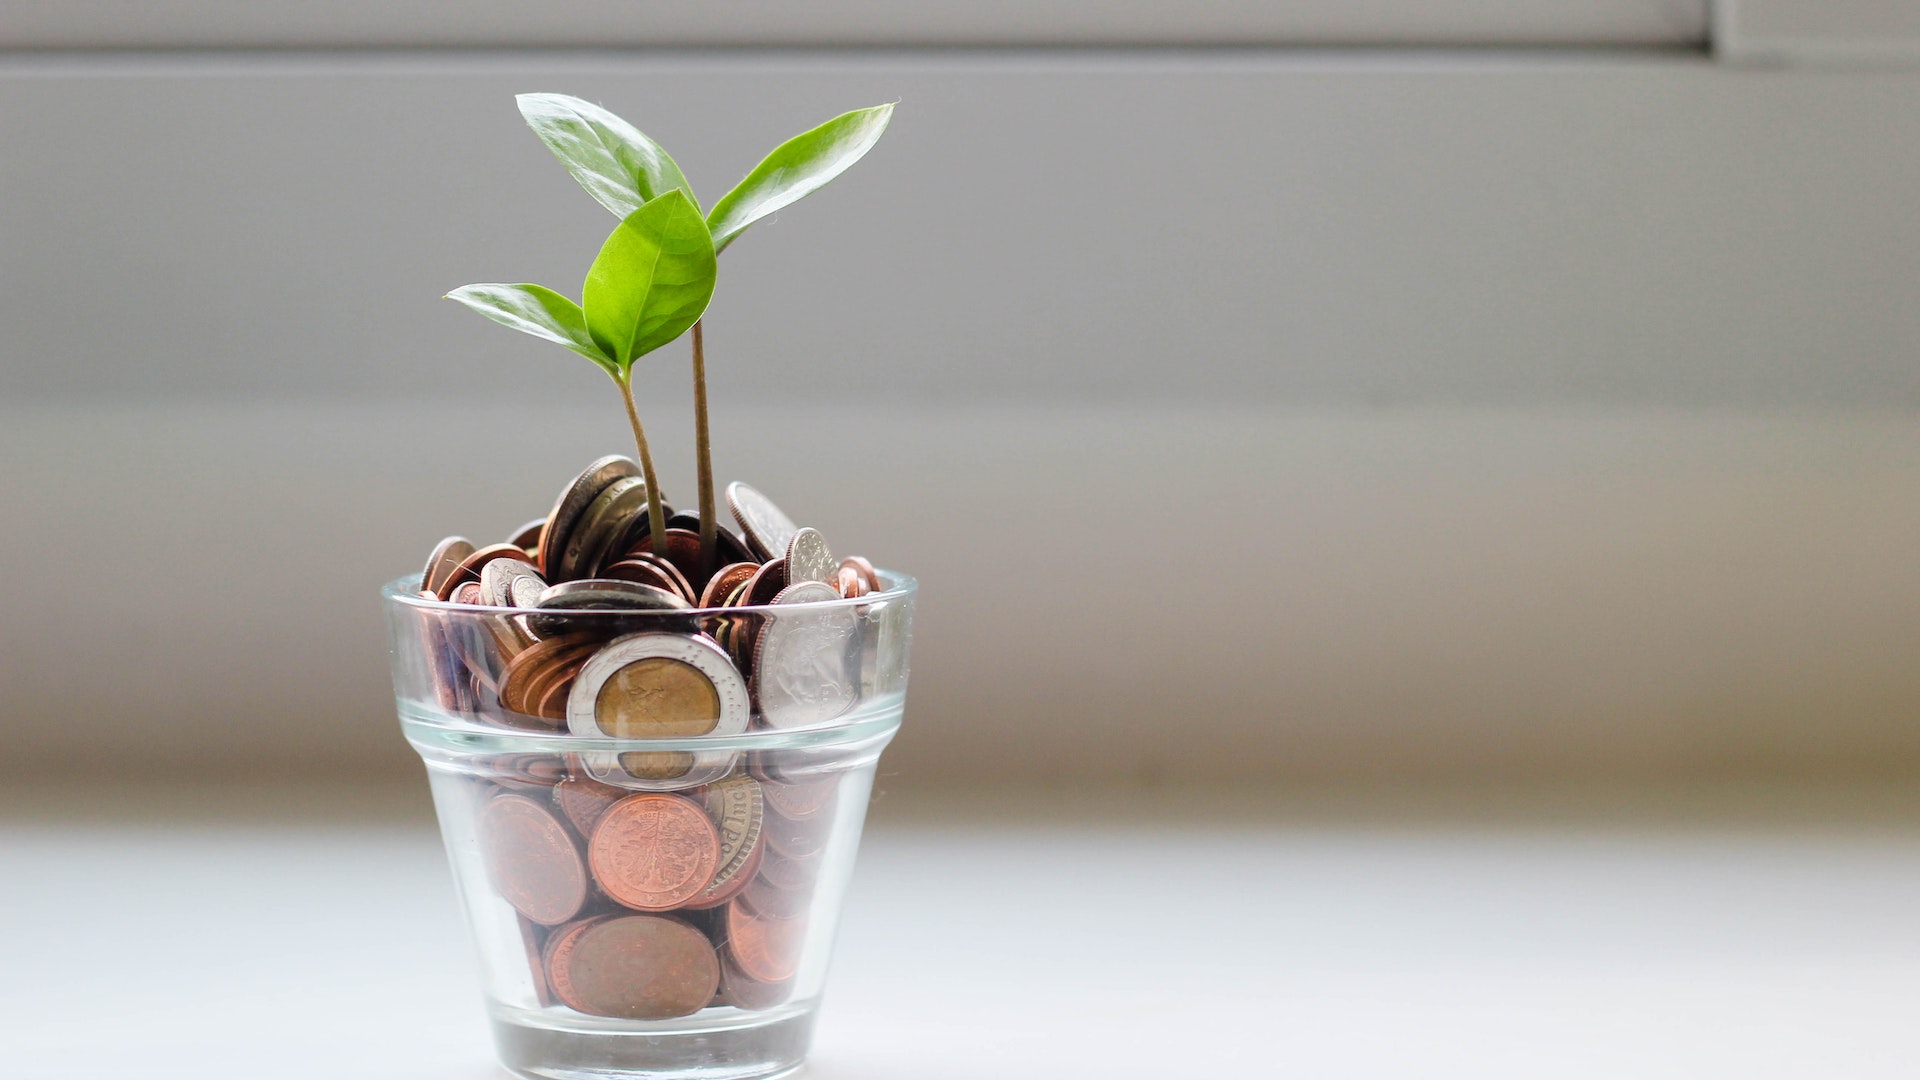 a sapling sprouts out of a glass full of coins